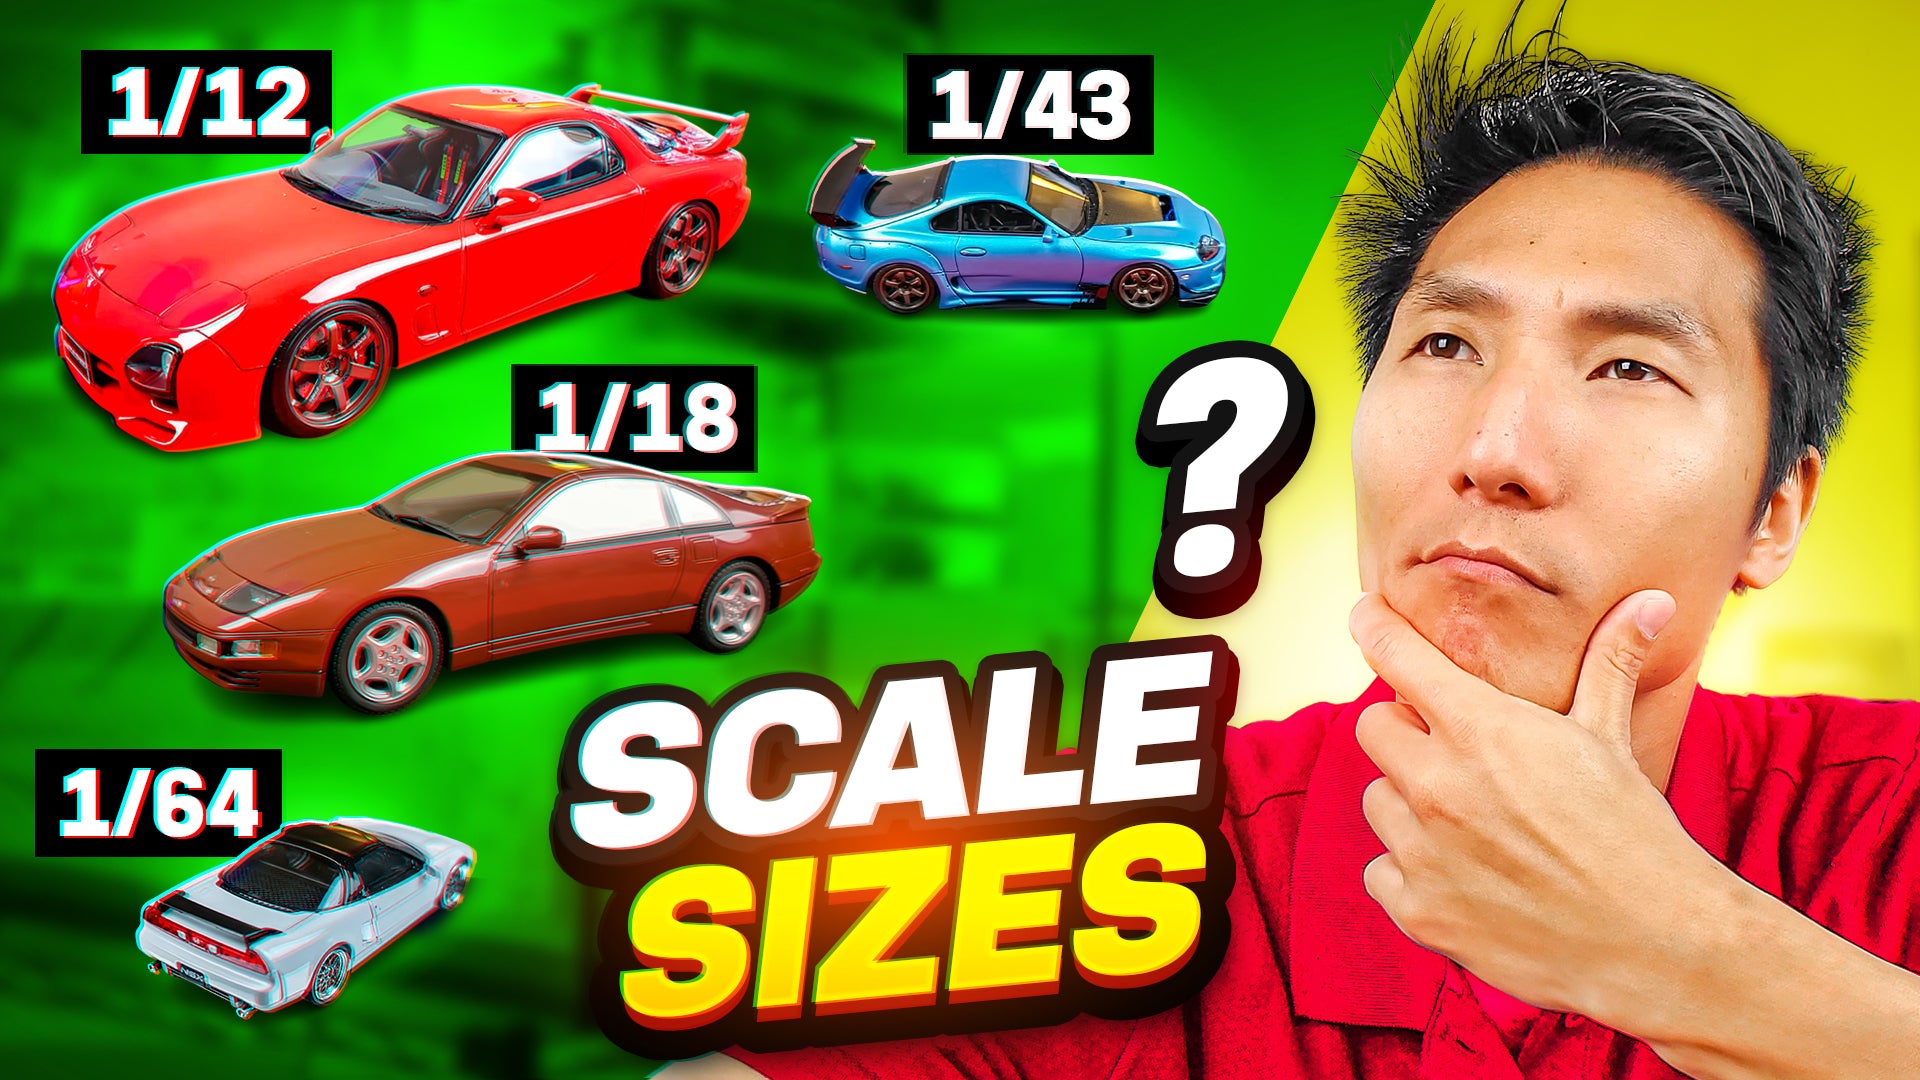 Building and Detailing Scale Model Cars - Is This Hobby for You?